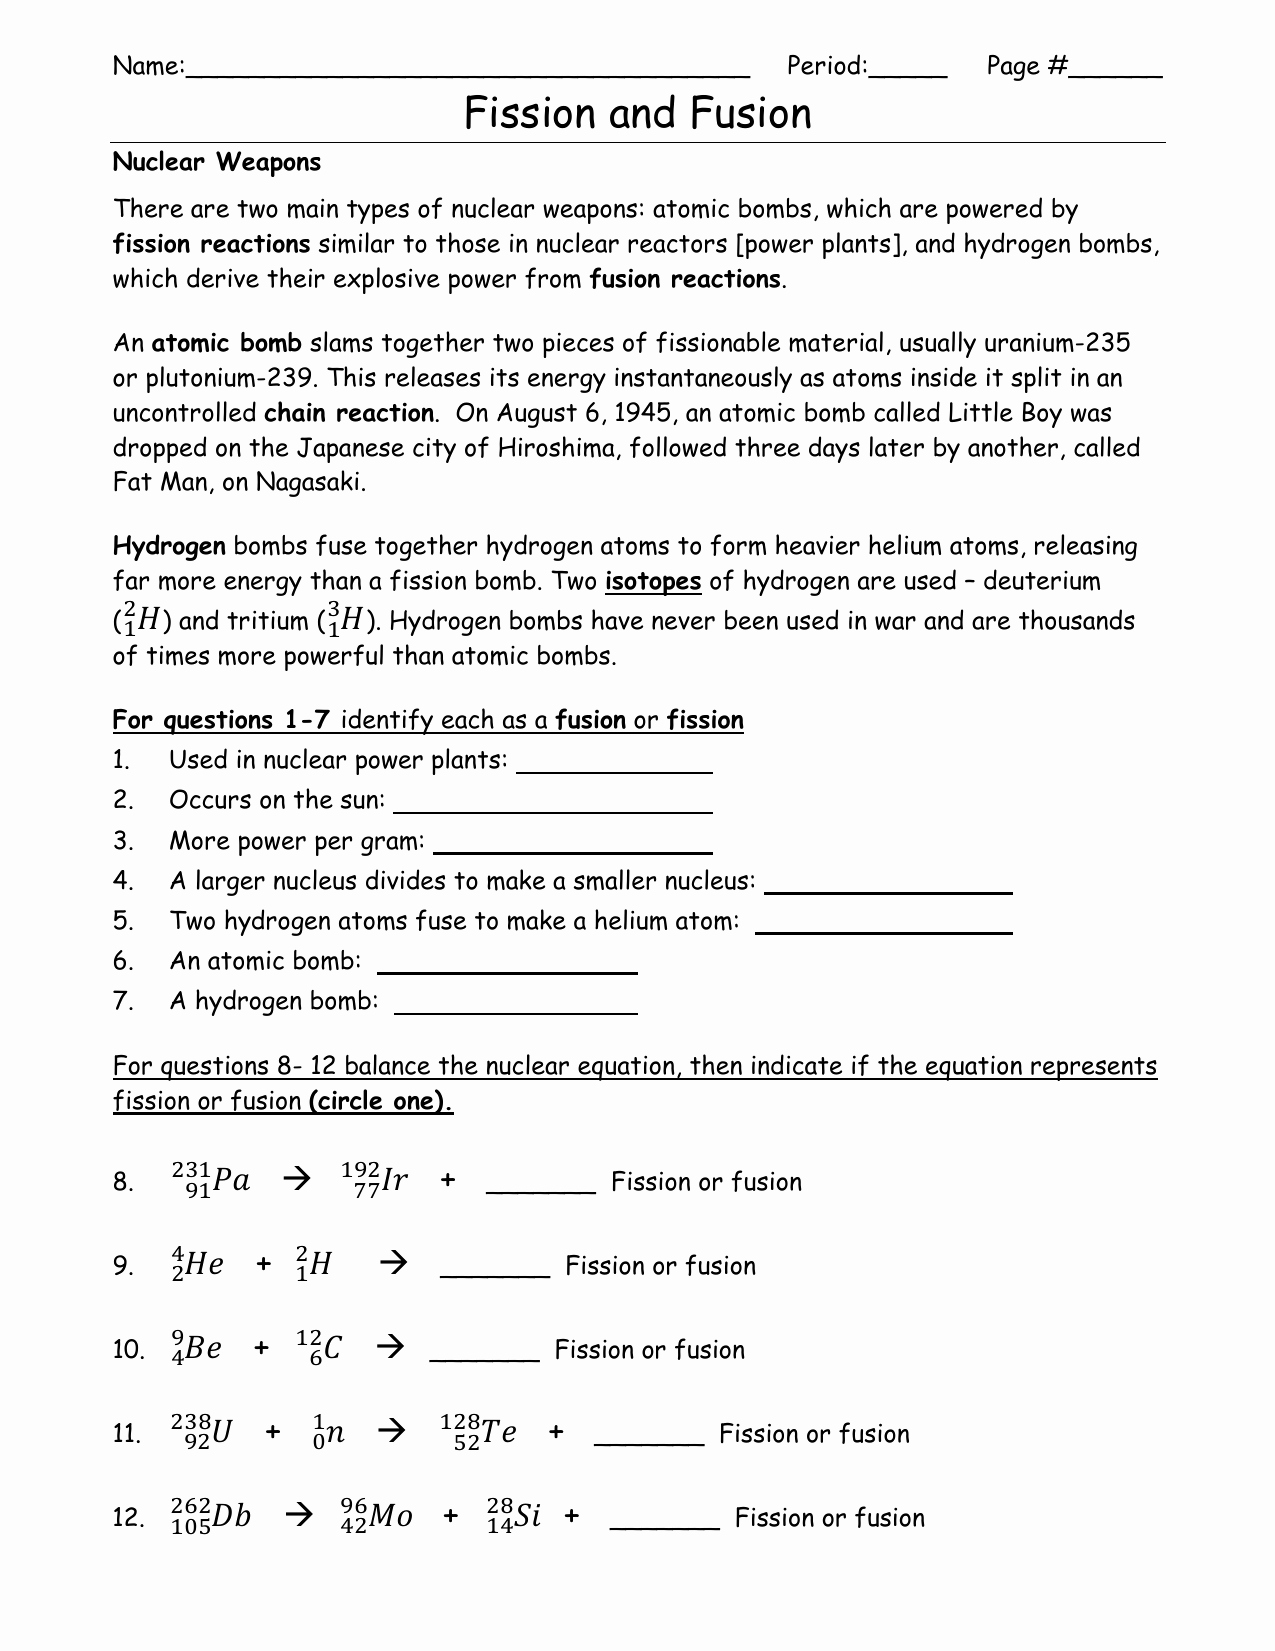 Nuclear Chemistry Worksheet Answers Unique Nuclear Fission and Fusion Worksheet Answers